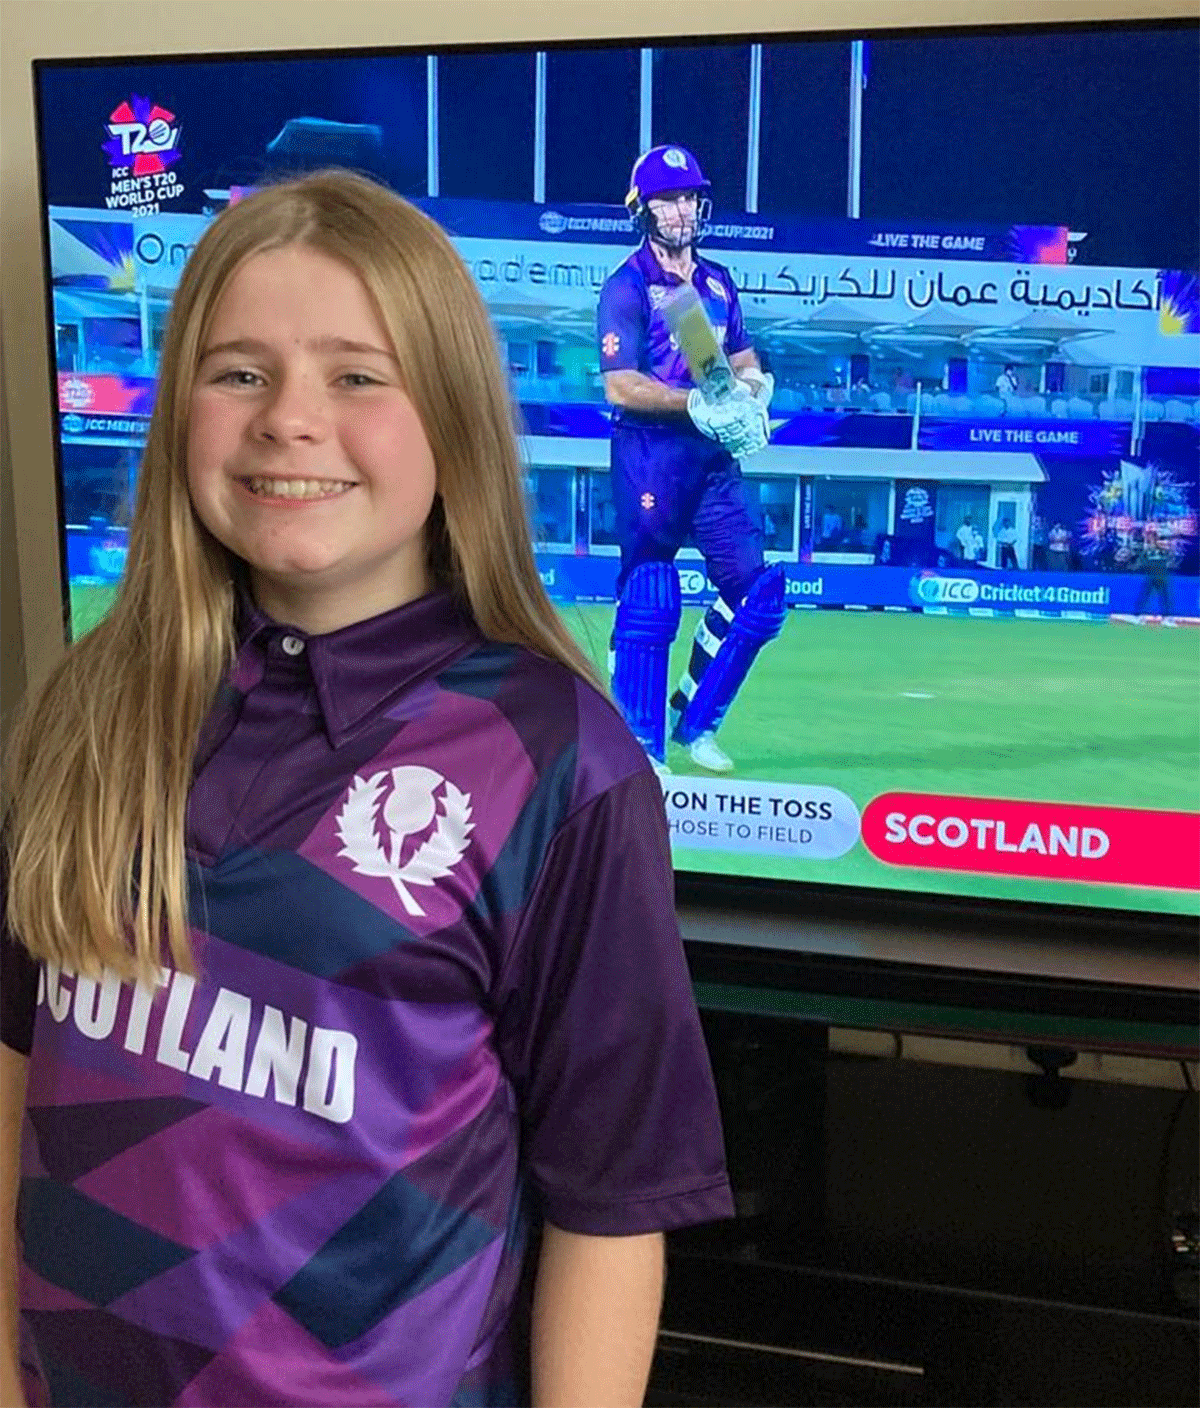 Cricket Scotland took to social media to thank Rebecca Haddington for her efforts in making the jersey while posting images of her wearing the kit and supporting the team during their first match against Bangladesh.